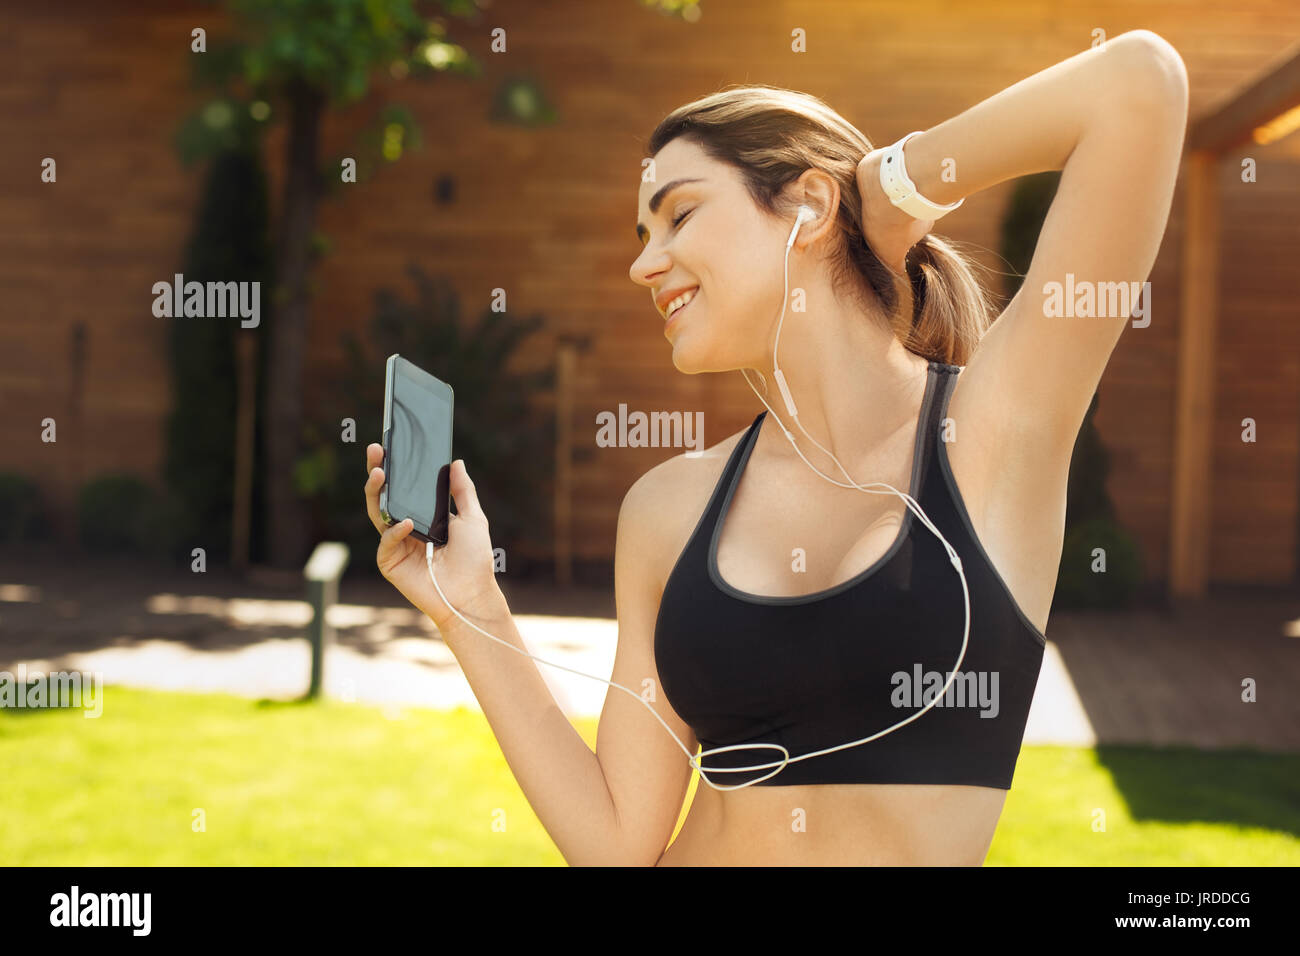 Young female exercise in the park listening music Stock Photo